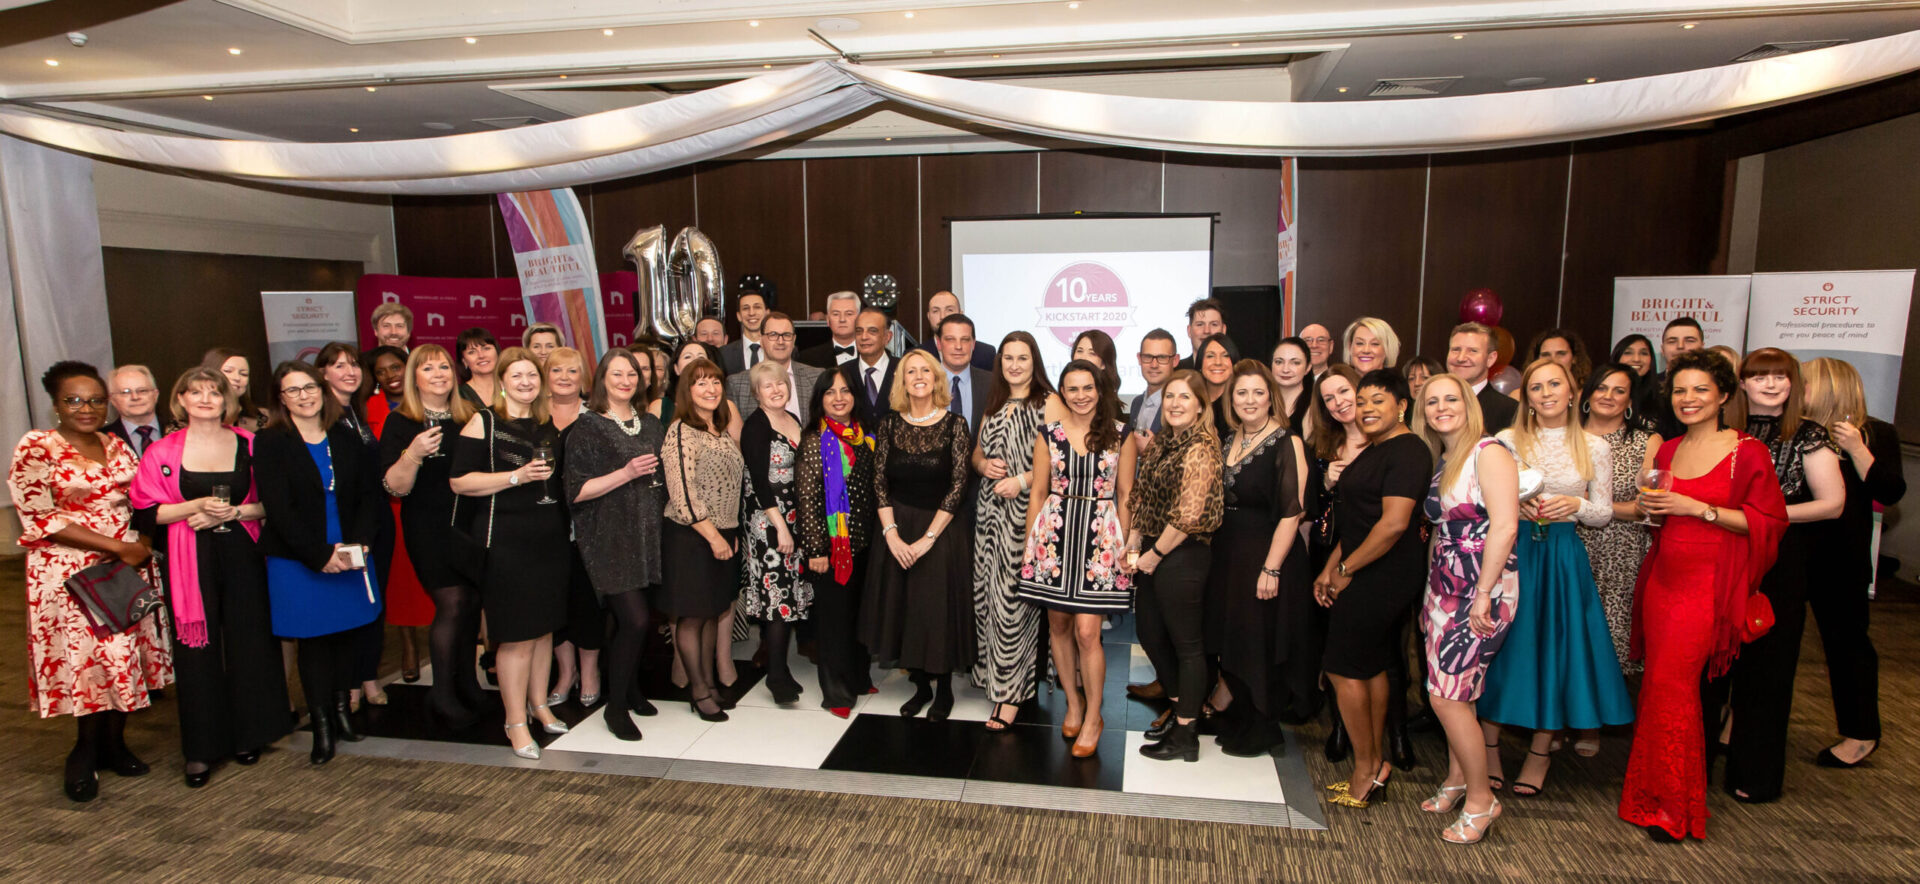 Bright & Beautiful national franchise network celebrates 10 years in franchising